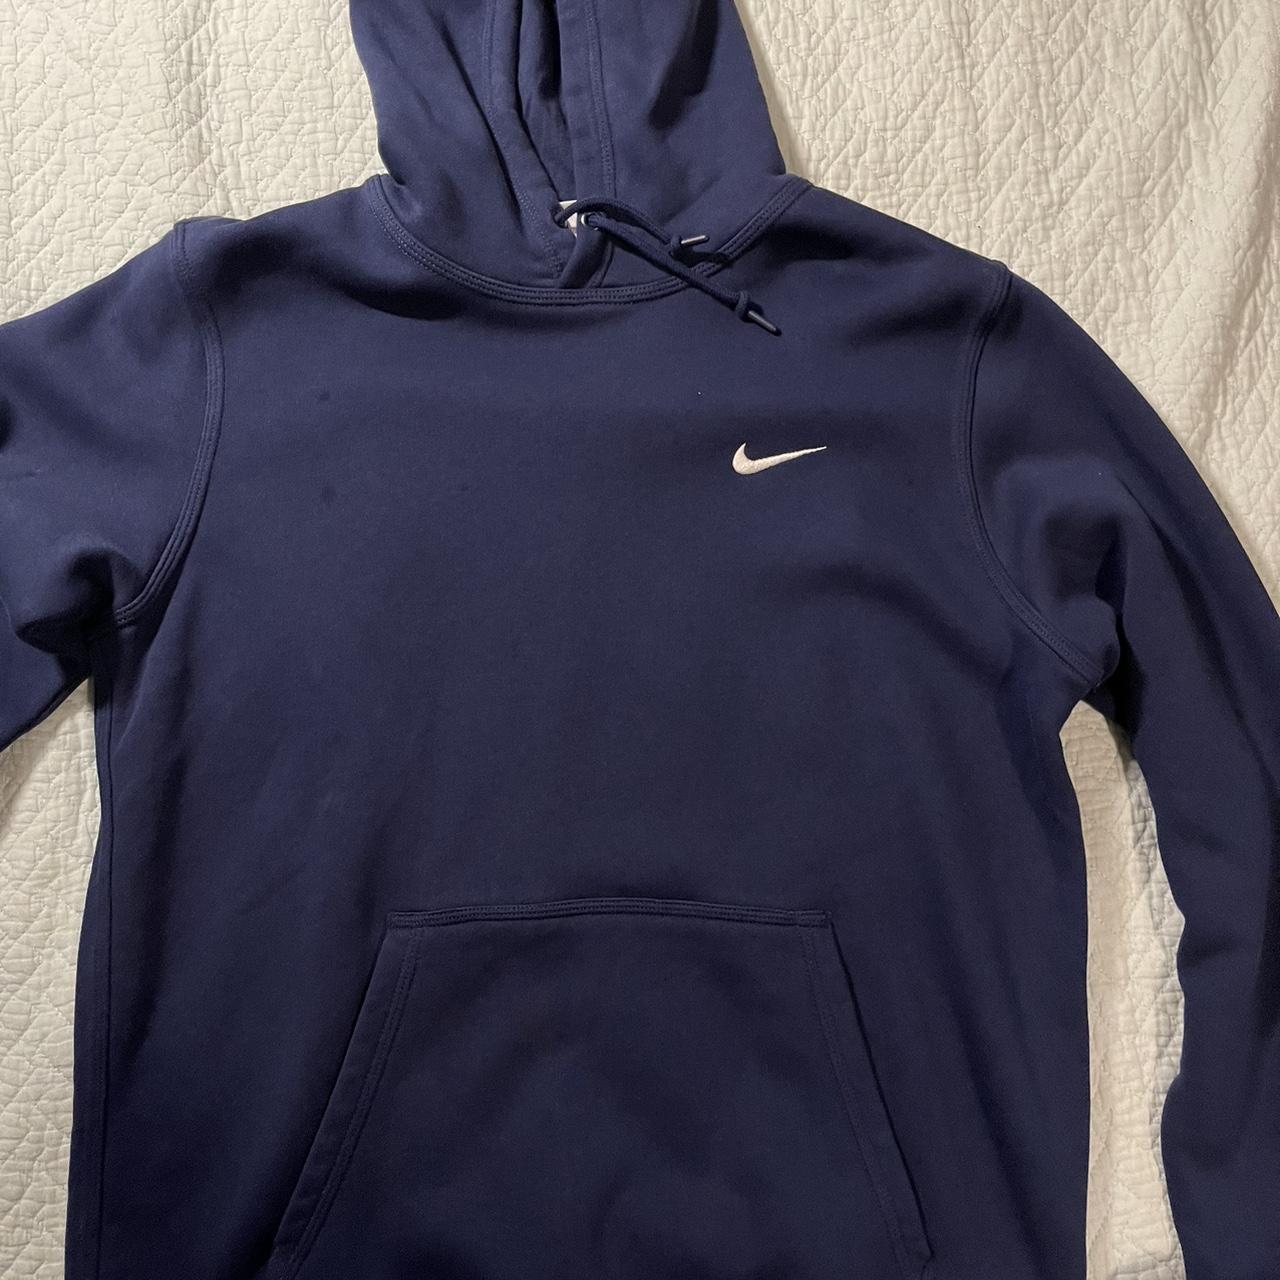 Navy Blue Nike Hoodie Size L Worn once does have a... - Depop